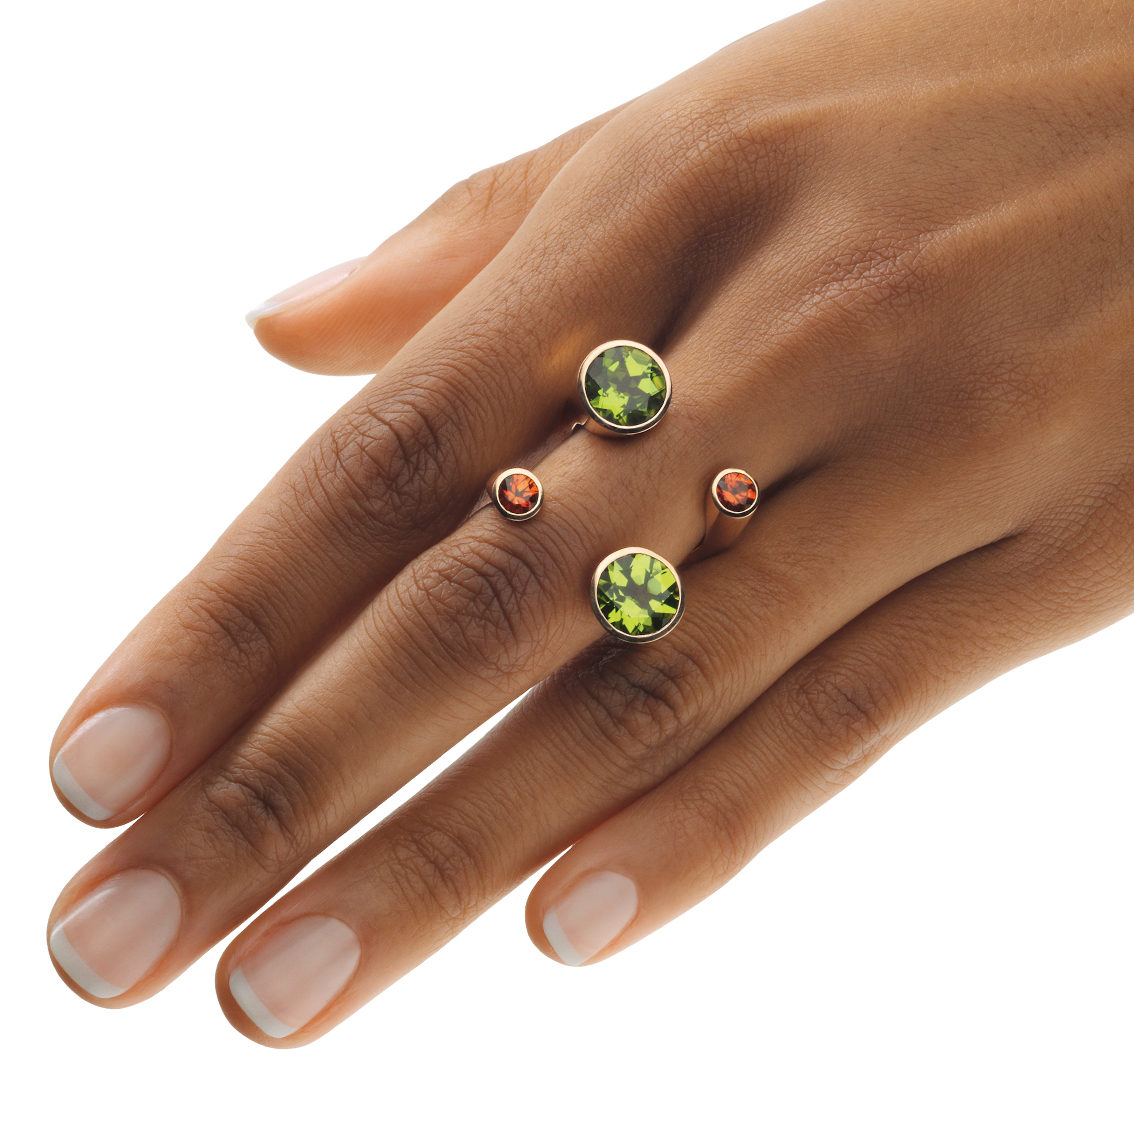 18 karat gold design ring with two orange sapphires and two peridots. The stones appear to be free on the hand.